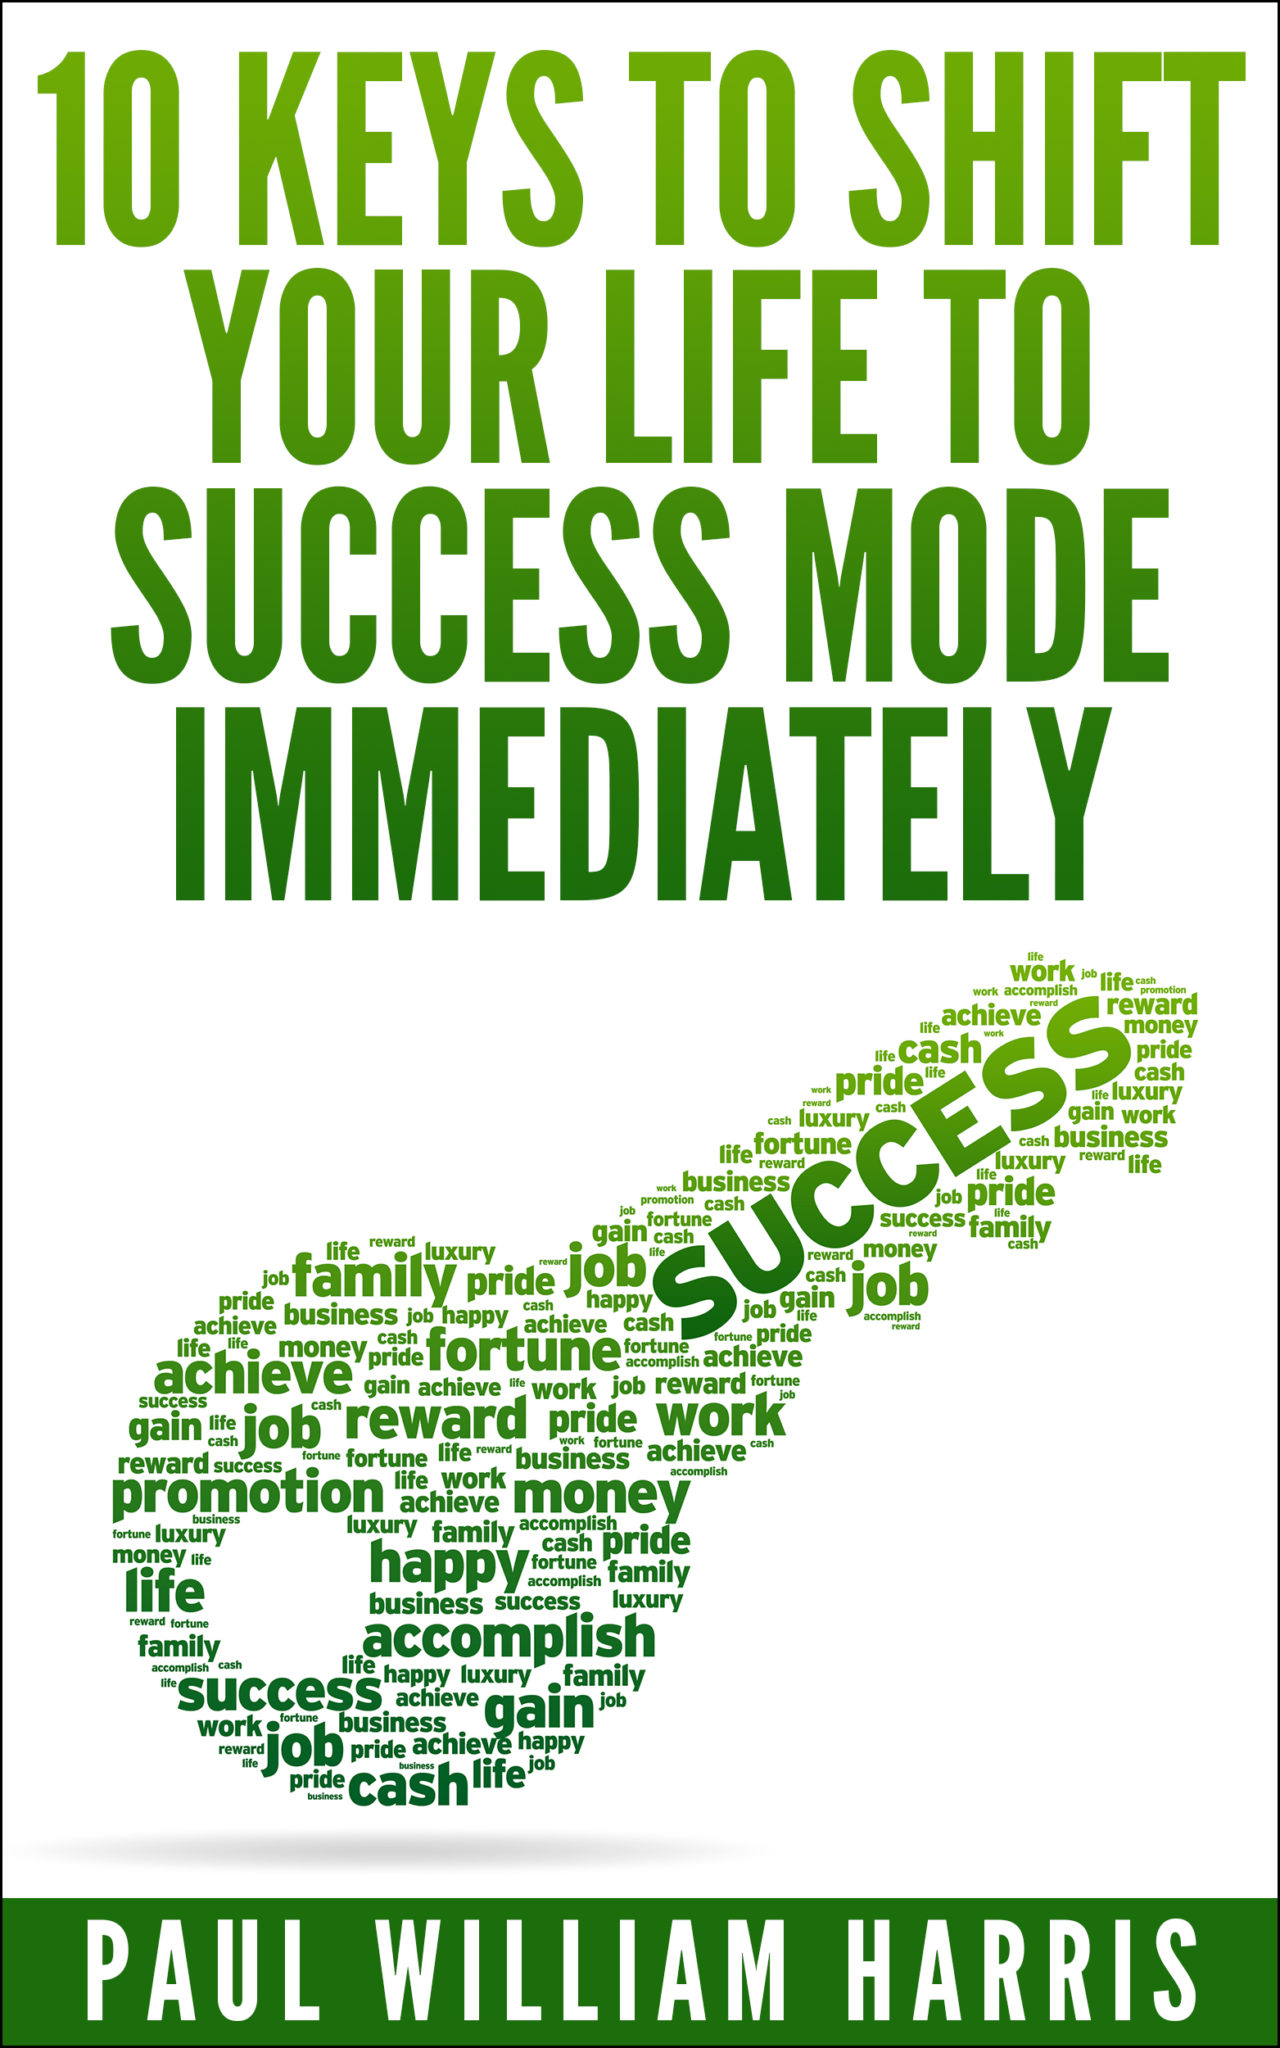 10 Keys To Shift Your Life To Success Mode Immediately by Paul William Harris